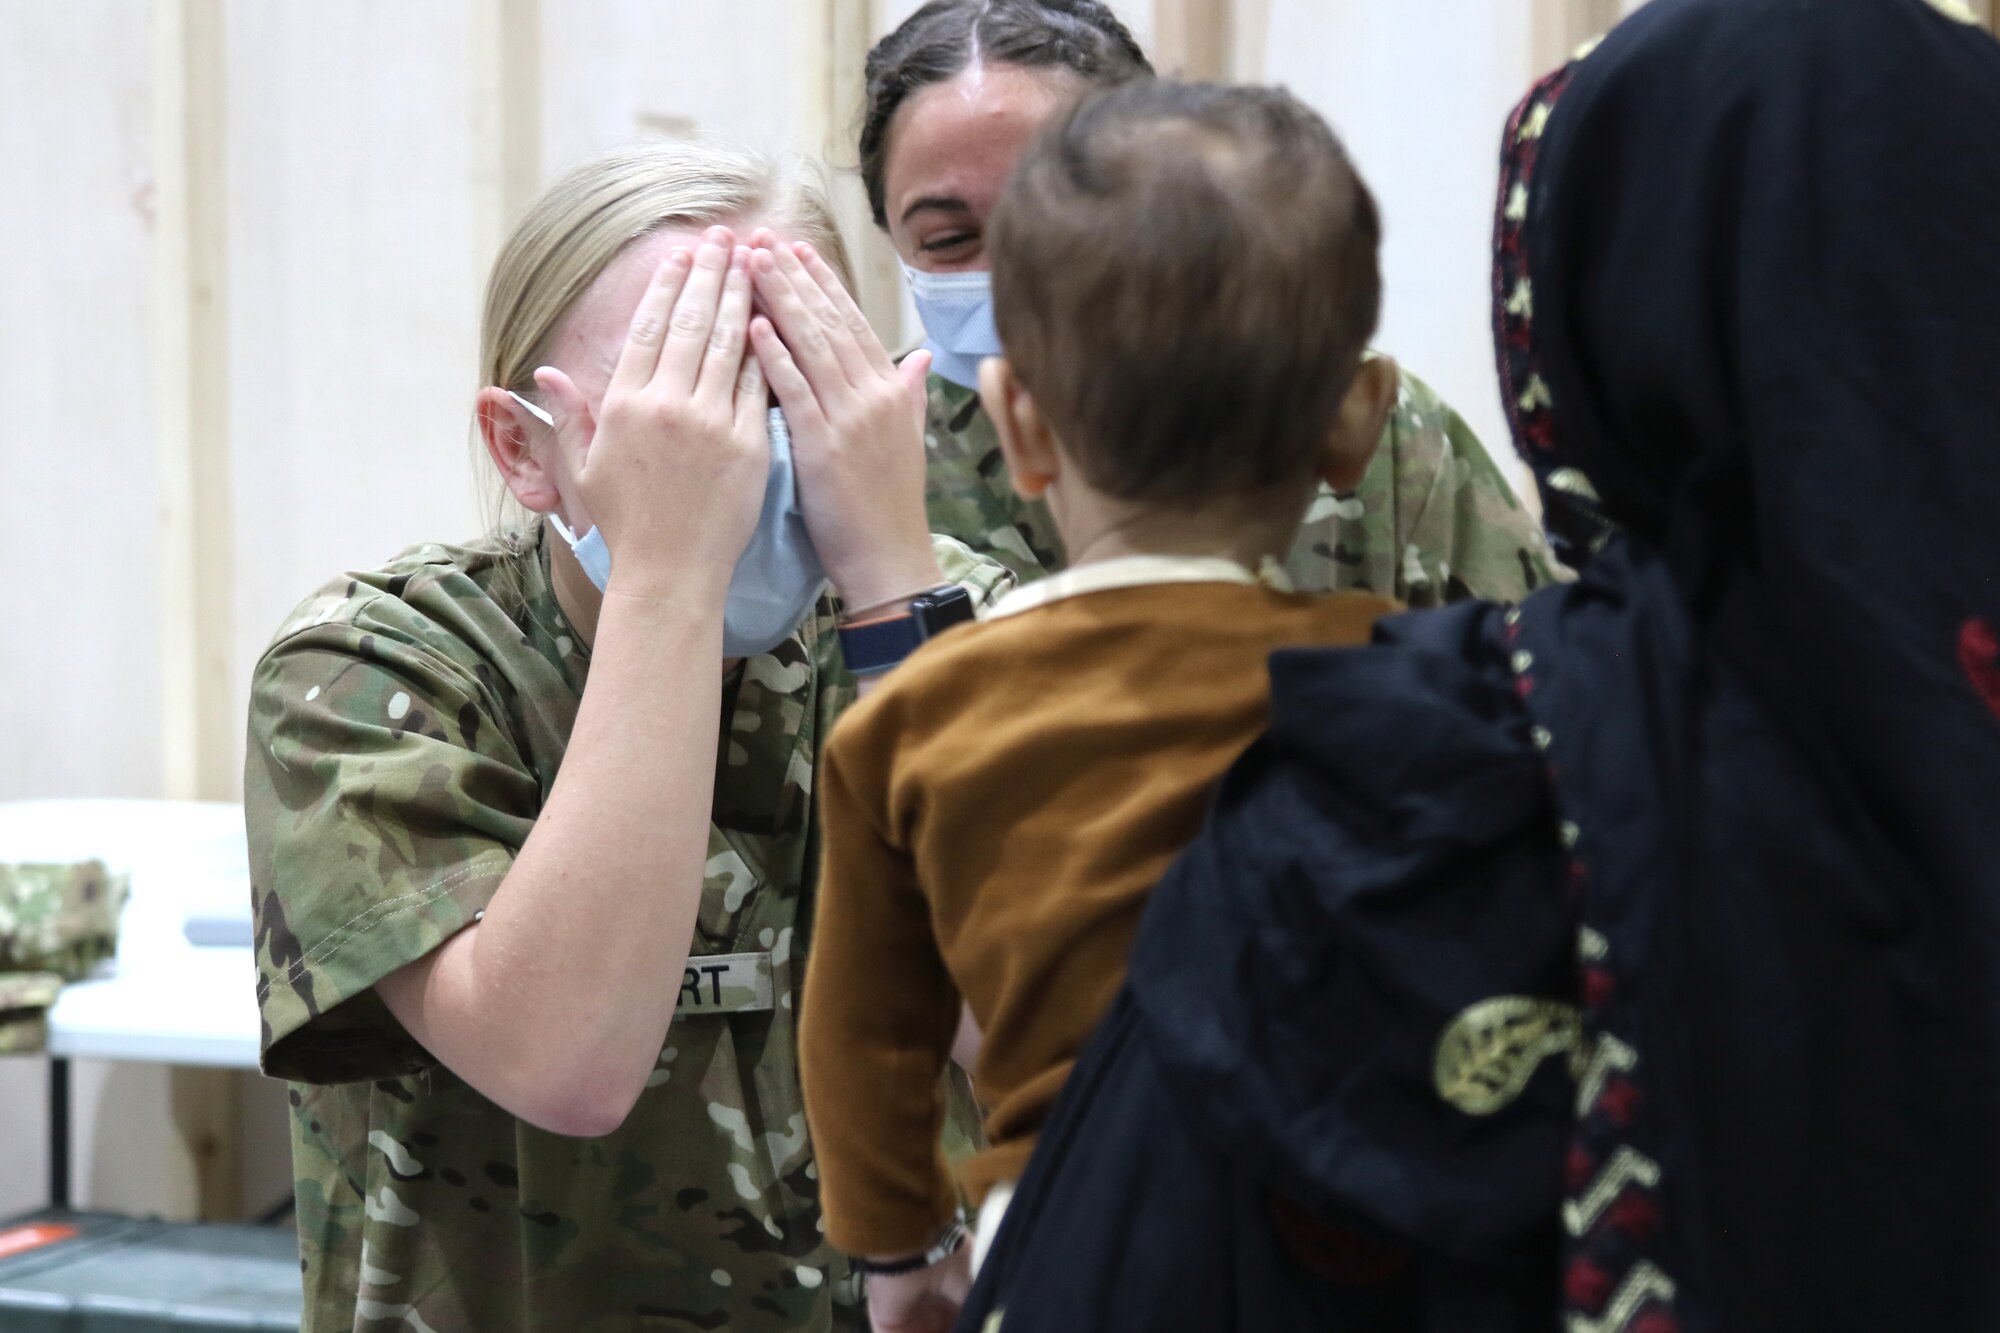 A U.S. Army National Guard Soldier with Task Force Spartan, U.S. Army Central, plays peekaboo with an Afghan child who recently arrived at Camp Buehring, Kuwait, Aug. 23, 2021.